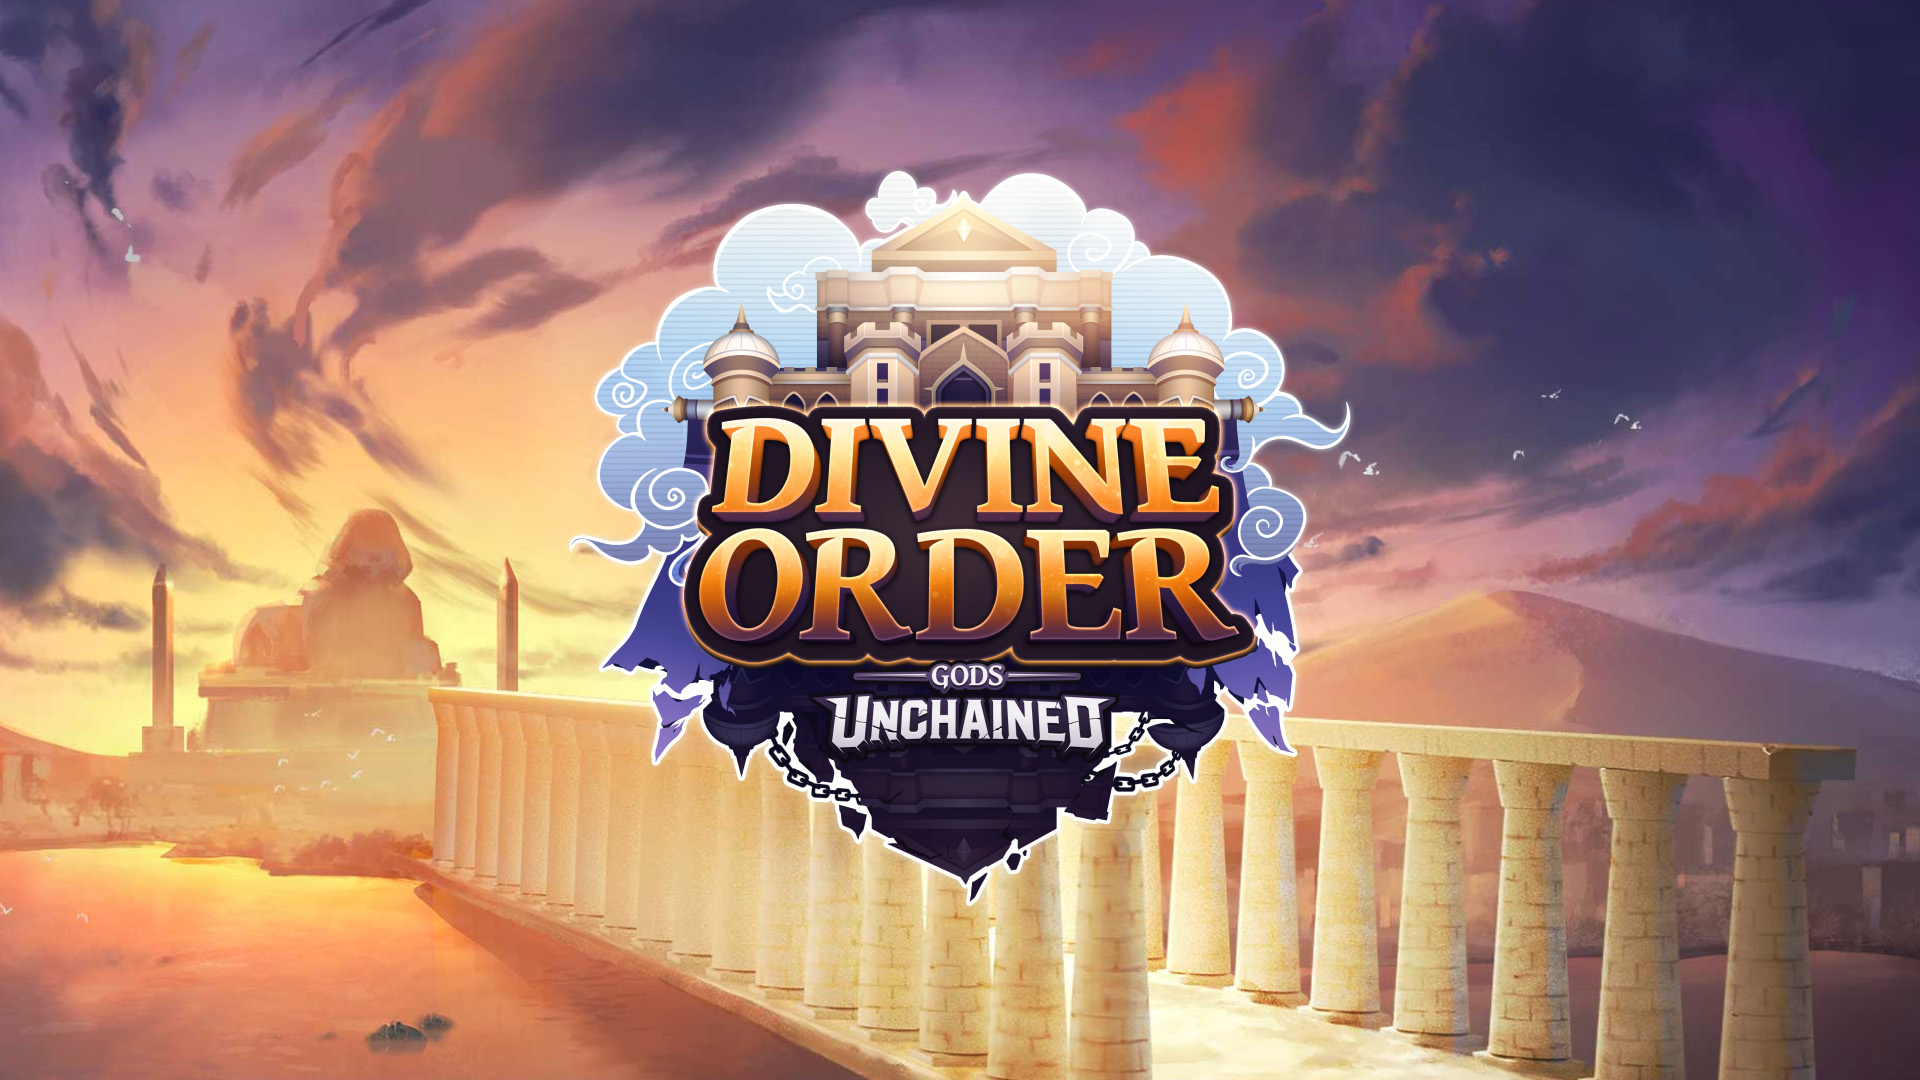 Last Chance for Gods Unchained Divine Order Packs